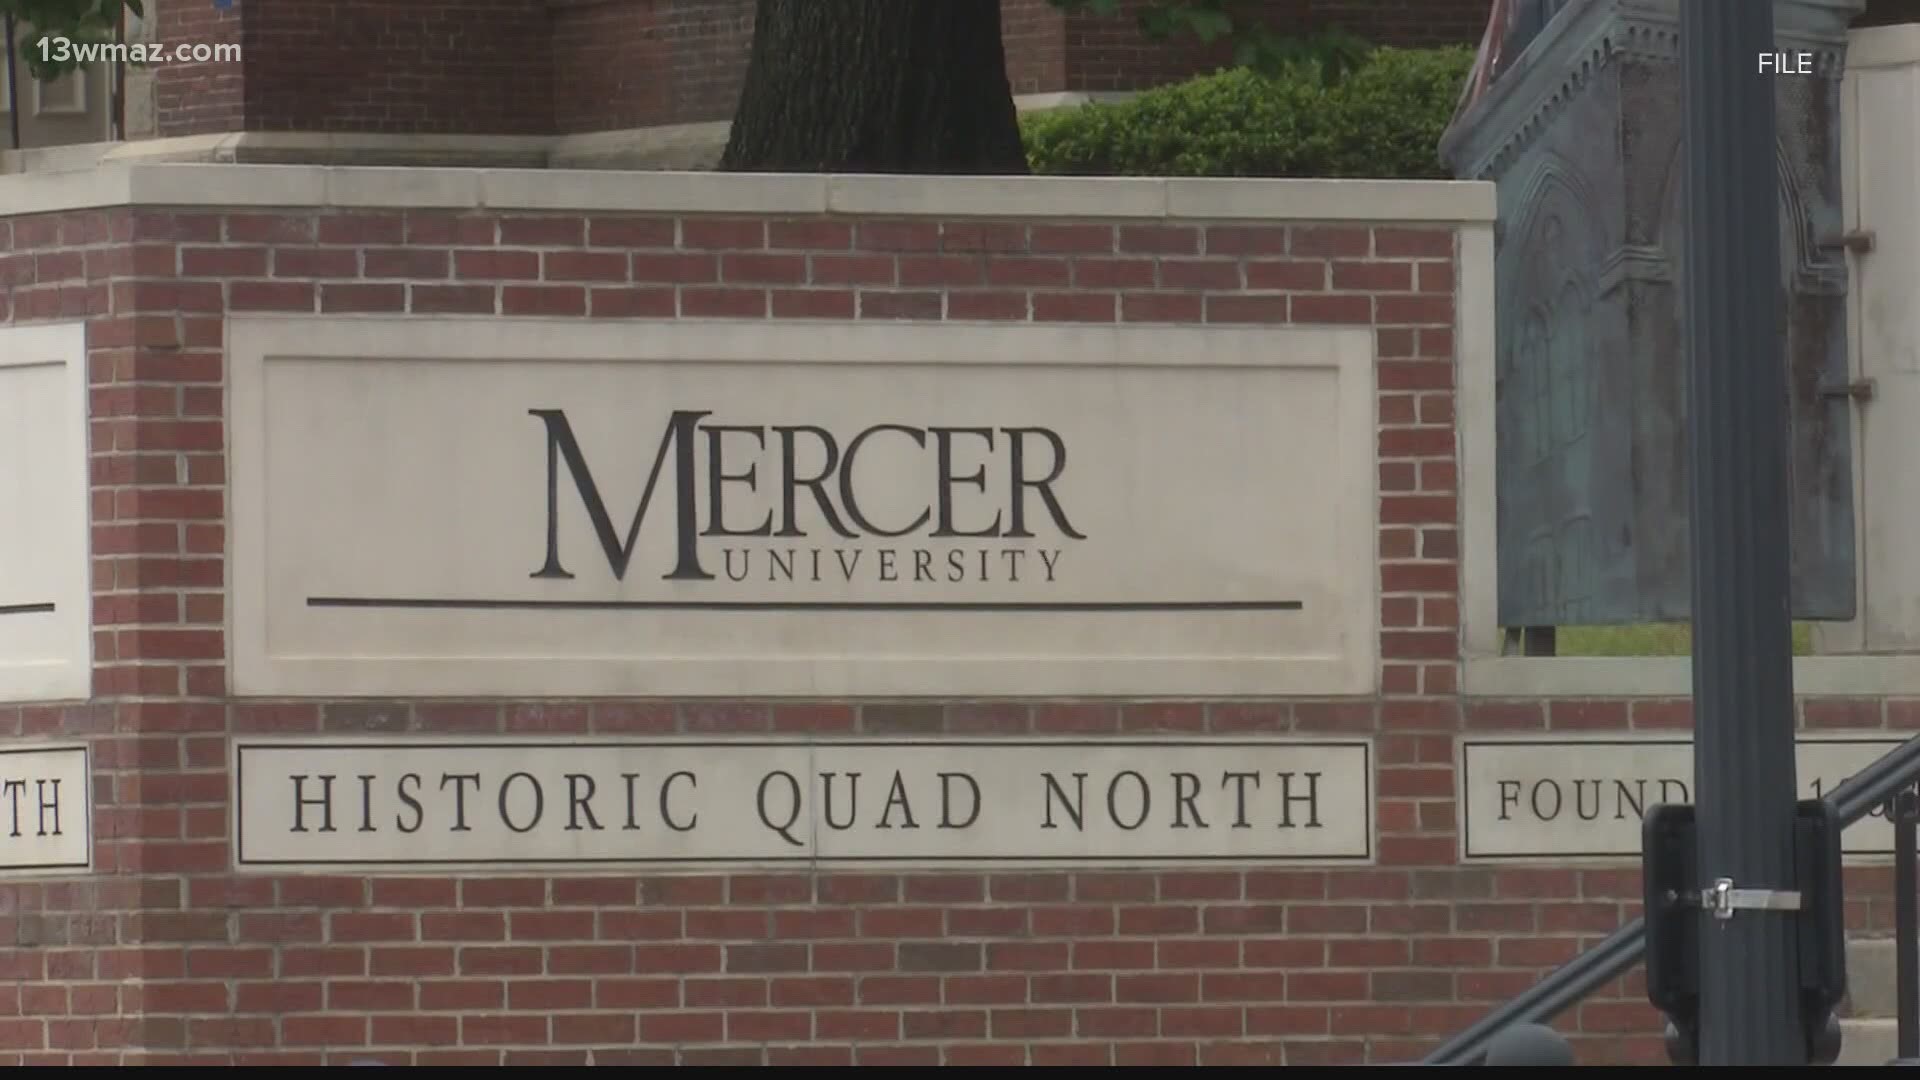 35 students have tested positive for coronavirus, including 29 student athletes, as part of Mercer University’s return to campus.